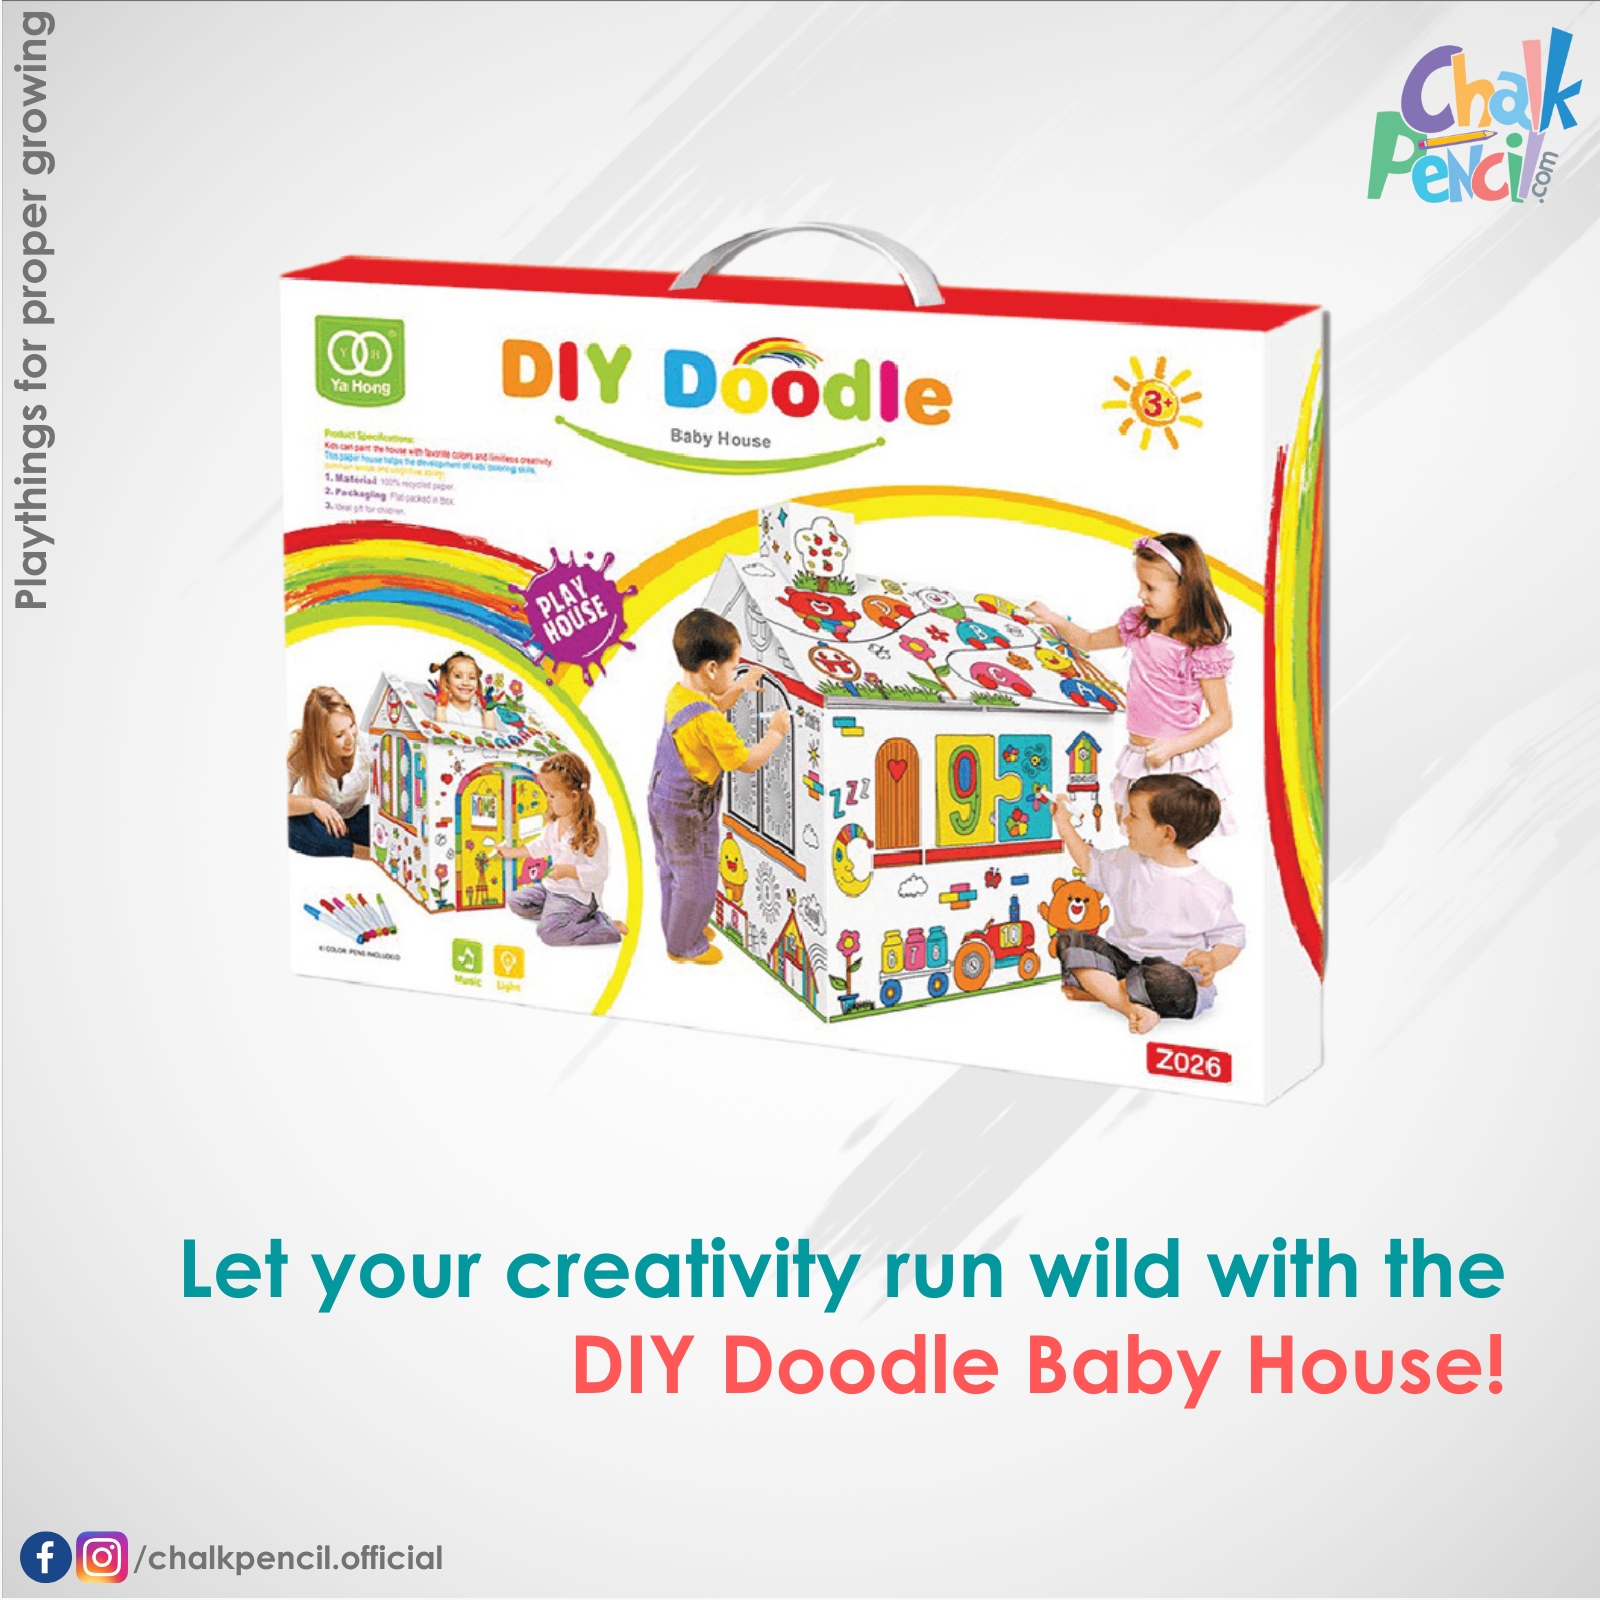 DIY Doodle Baby House